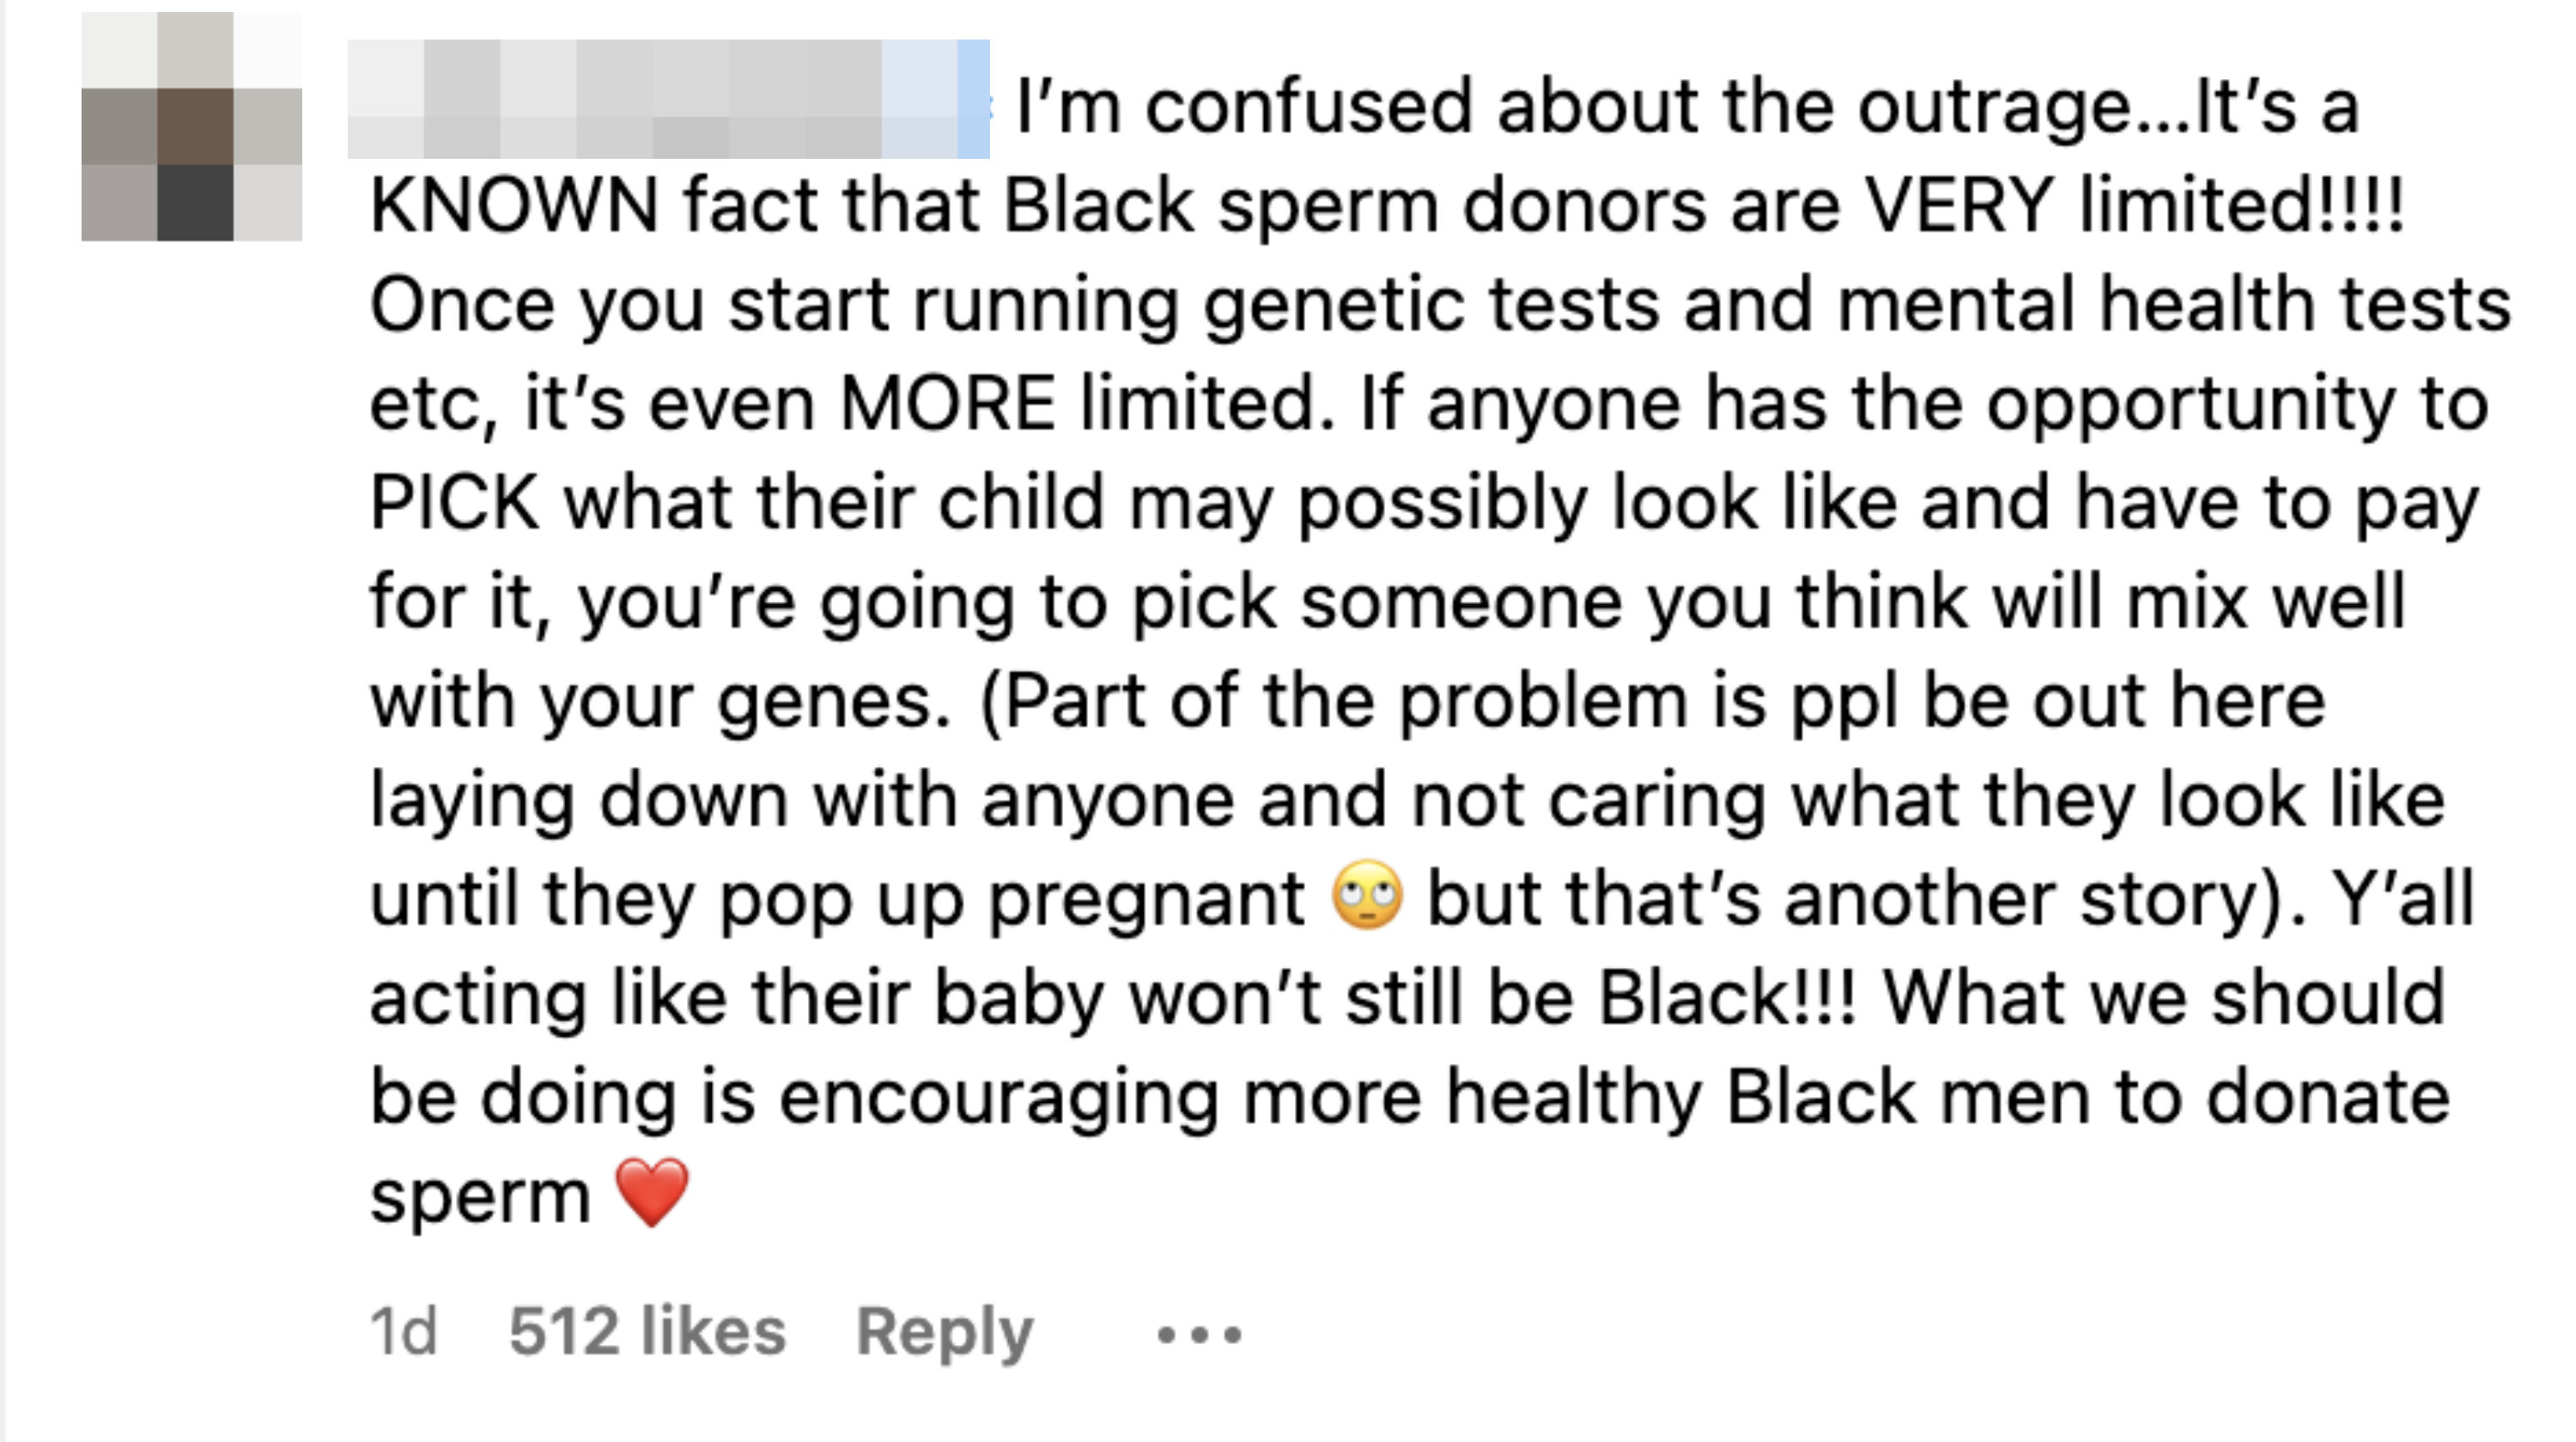 A comment saying that &quot;it&#x27;s a known fact that Black sperm donors are very limited&quot;